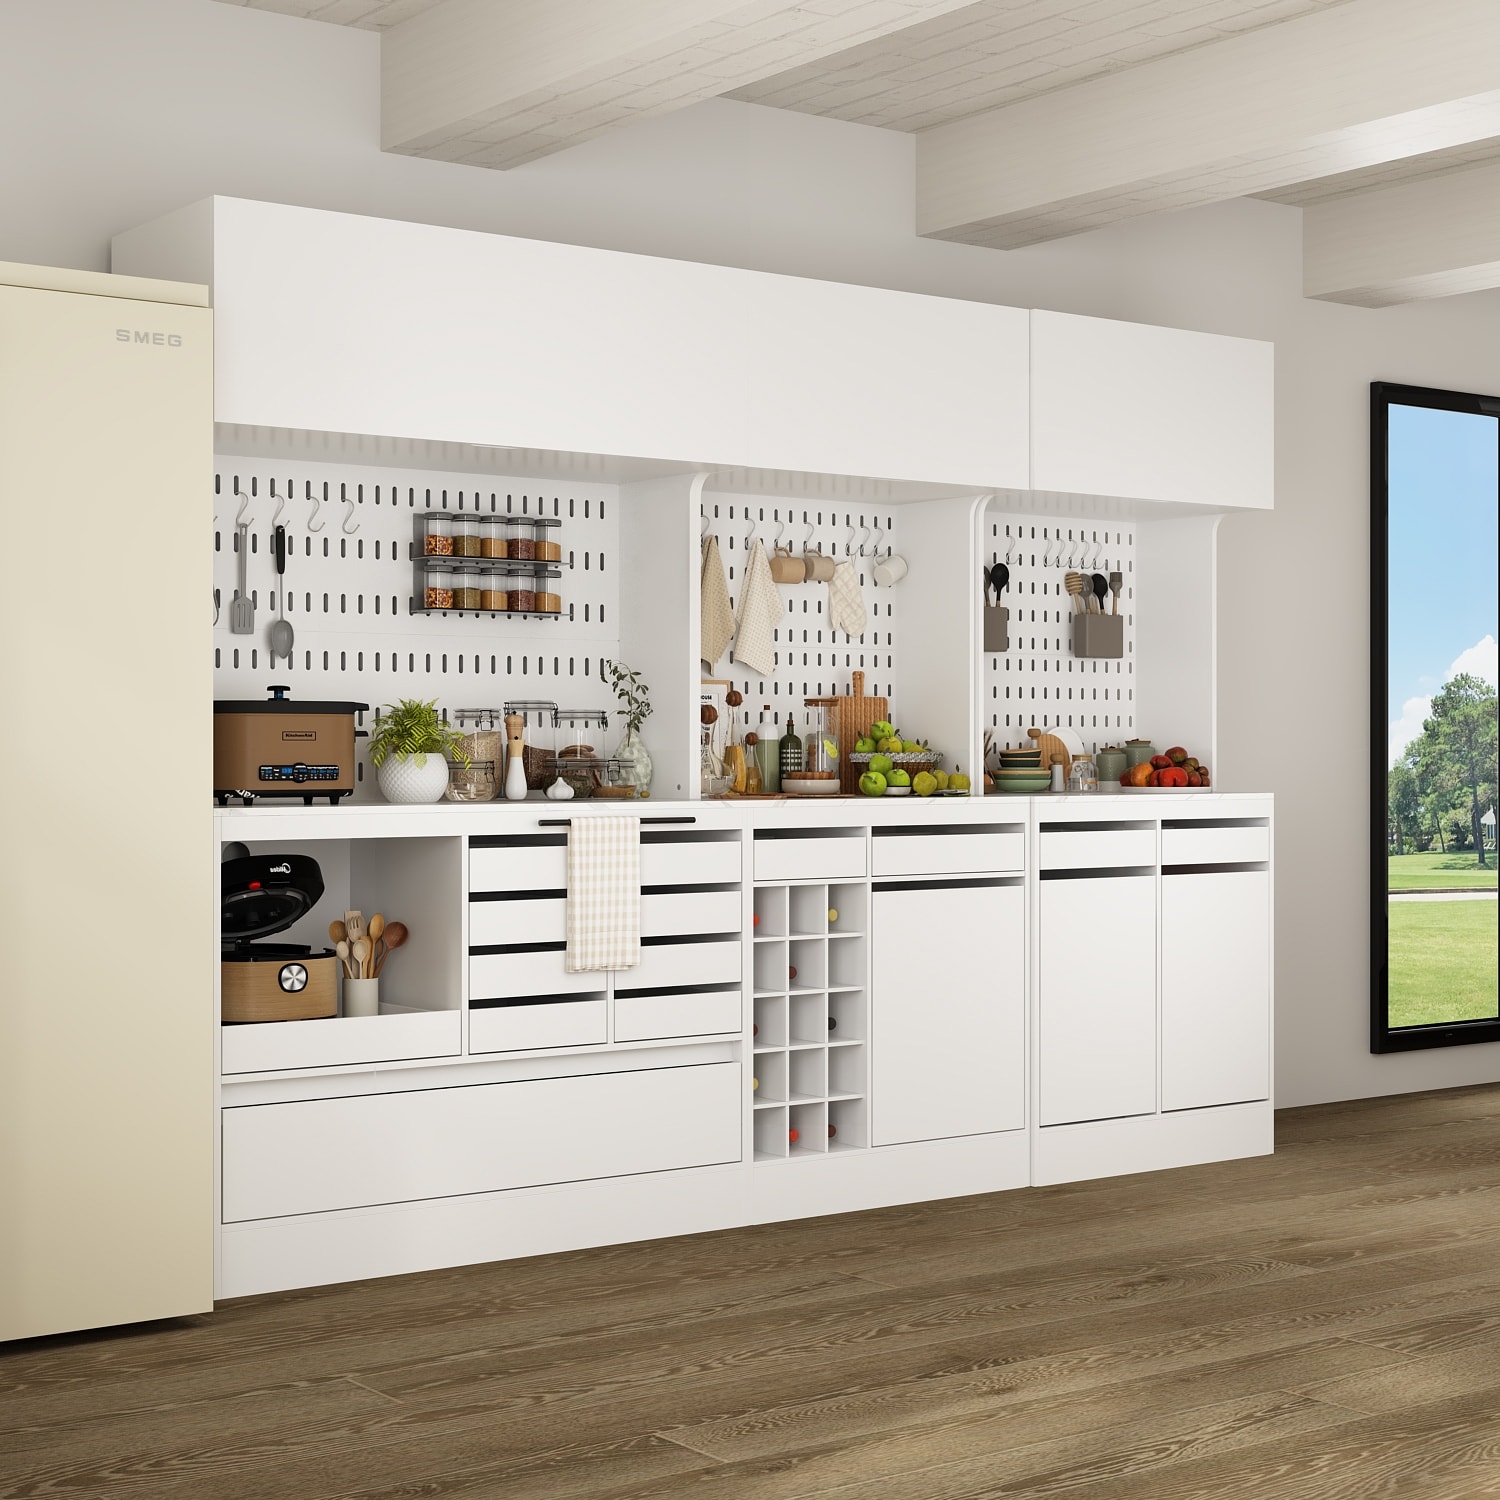 https://ak1.ostkcdn.com/images/products/is/images/direct/8416dc6108efc0b19ae98e6fcad5beda4ed313ee/Pantry-Storage-Cabinet-78.7%22-Modular-Kitchen-Buffet-Kitchen-Cupboard.jpg